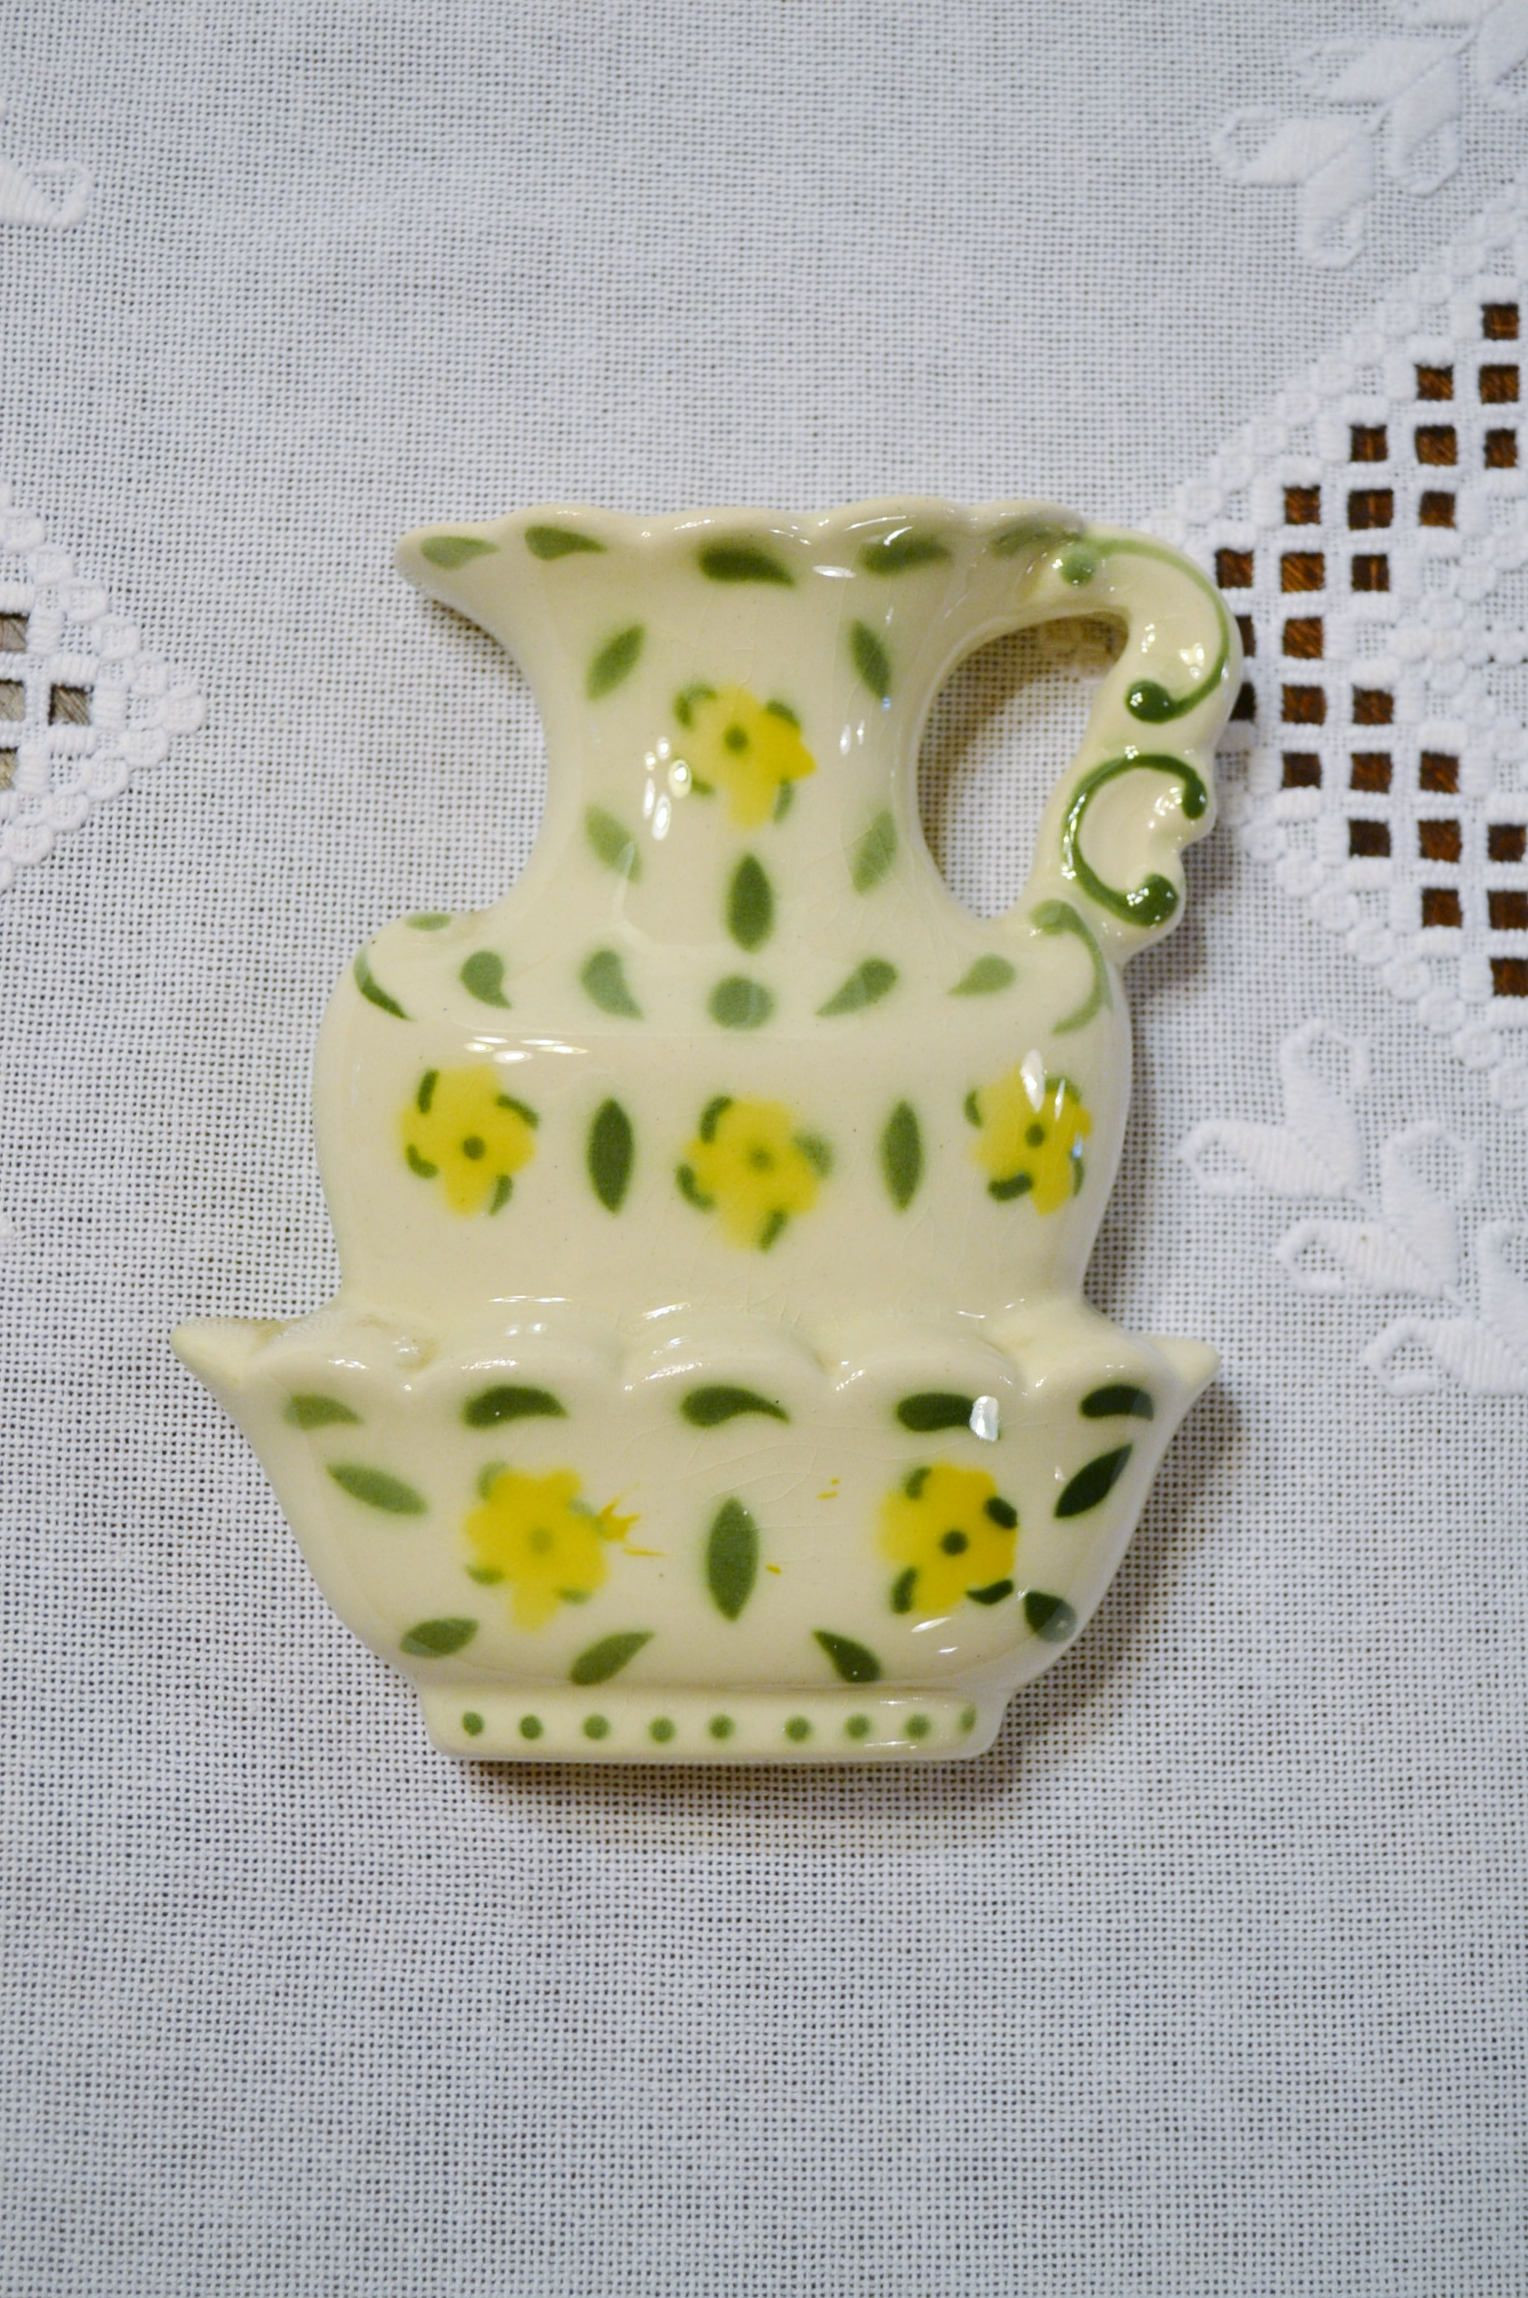 27 Awesome White Ceramic Wall Vase 2024 free download white ceramic wall vase of vintage ceramic vase pink flowers 22k gold details white fade to pertaining to vintage ceramic wall pocket hanging vase planter pitcher and bowl yellow green flora